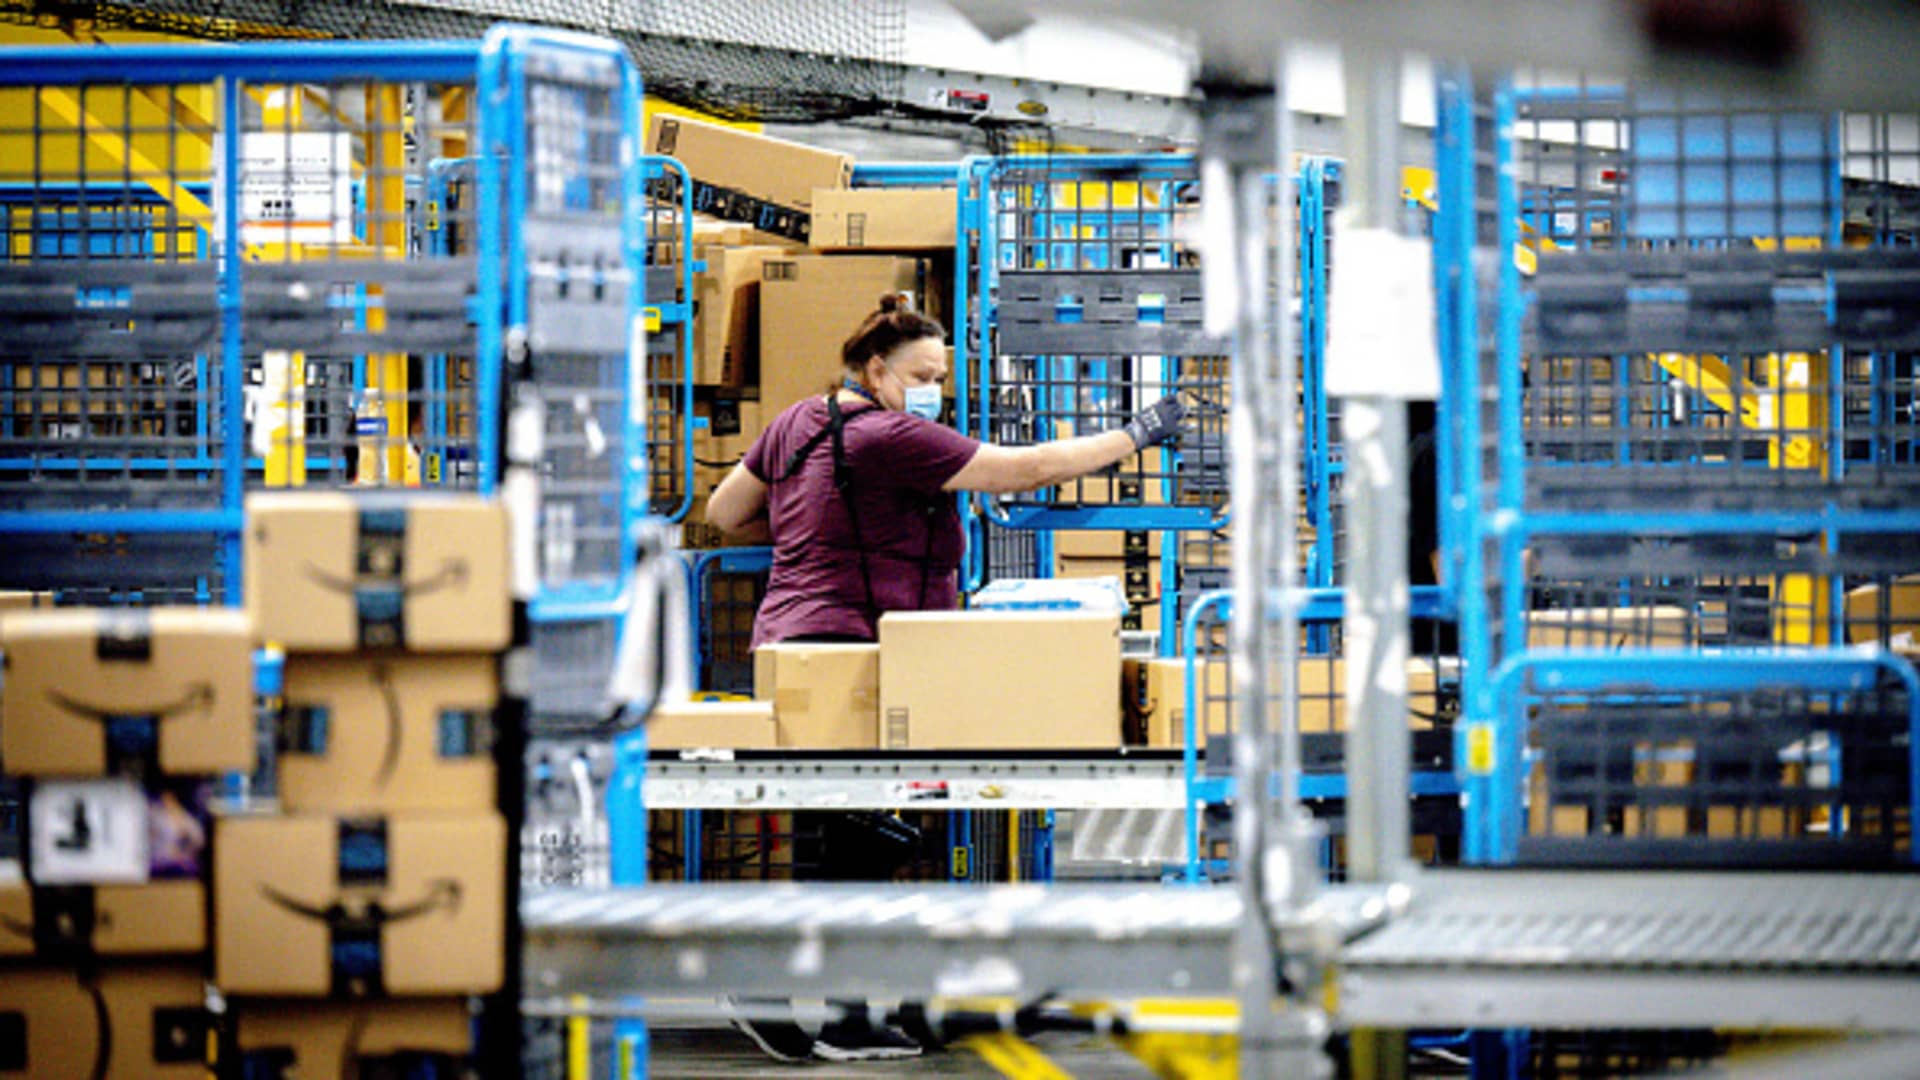 Amazon adding 250,000 workers for the holidays and bumping average pay